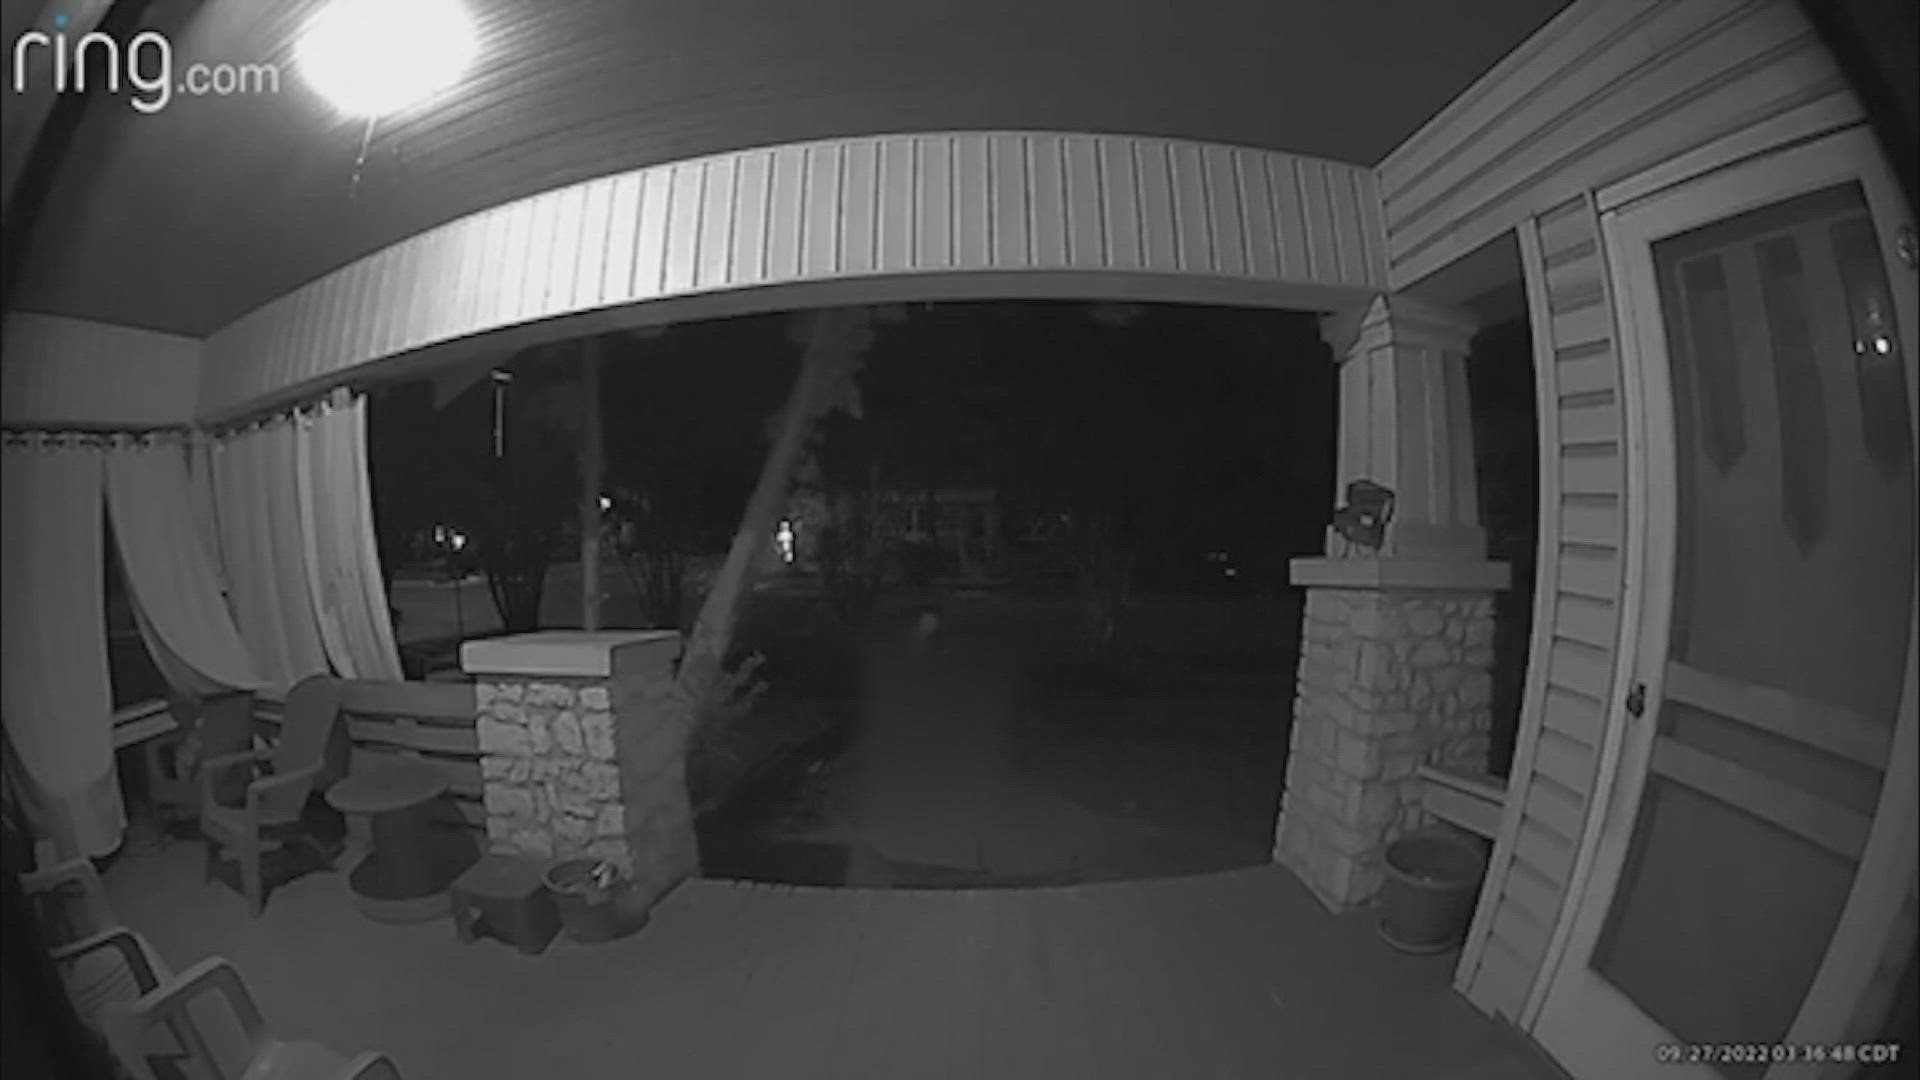 Home surveillance camera captures lewd act on front porch of home.